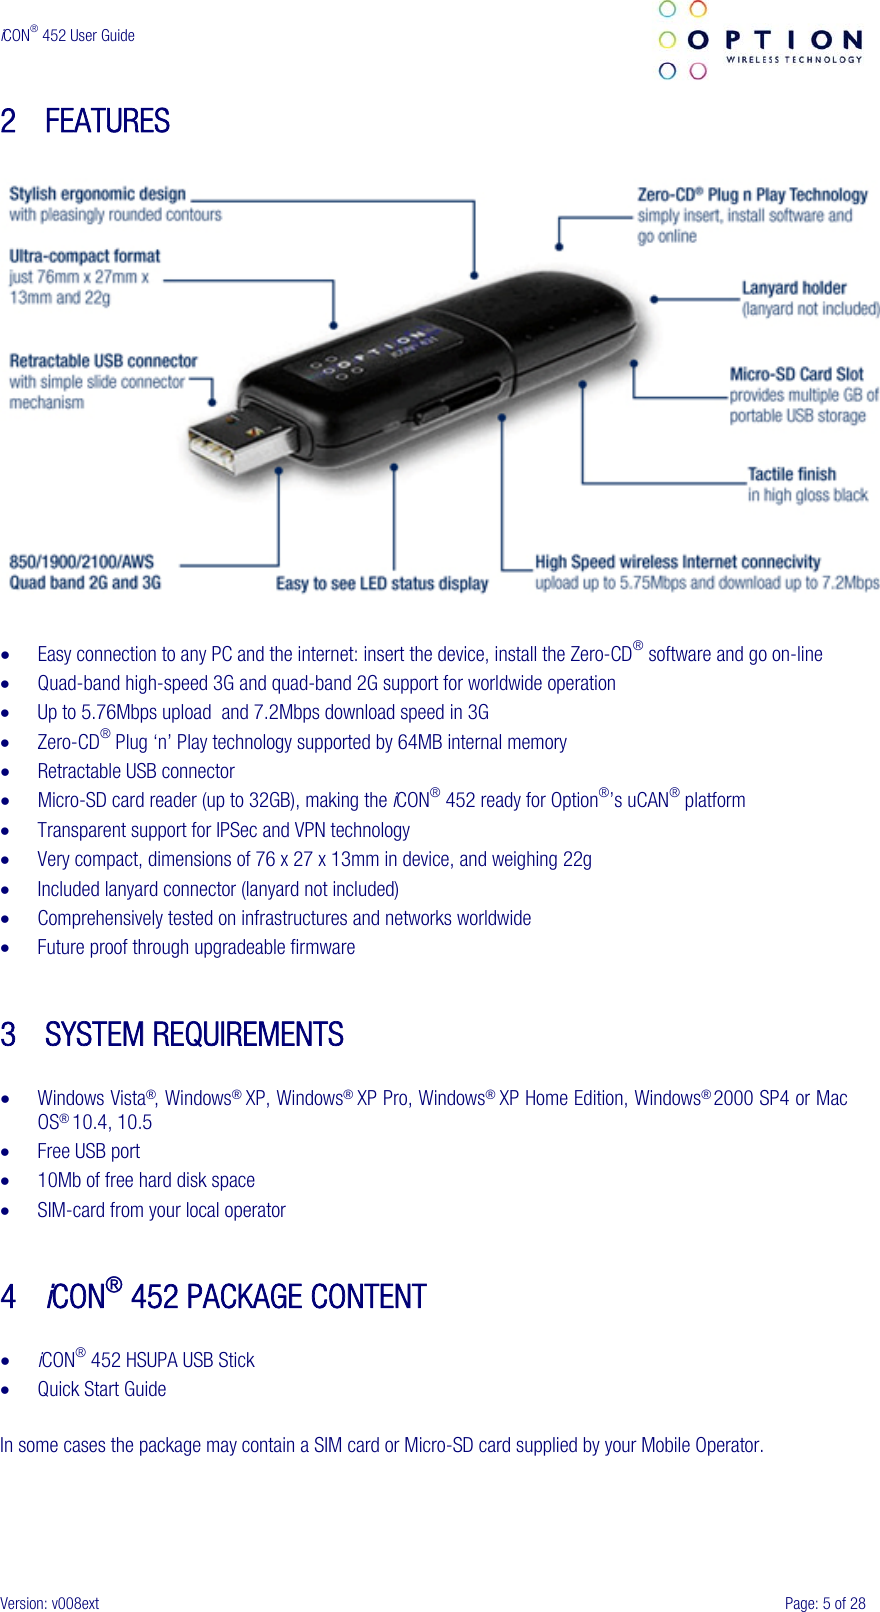  iCON® 452 User Guide     Version: v008ext  Page: 5 of 28 2 FEATURES    • Easy connection to any PC and the internet: insert the device, install the Zero-CD® software and go on-line • Quad-band high-speed 3G and quad-band 2G support for worldwide operation • Up to 5.76Mbps upload  and 7.2Mbps download speed in 3G • Zero-CD® Plug ‘n’ Play technology supported by 64MB internal memory • Retractable USB connector • Micro-SD card reader (up to 32GB), making the iCON® 452 ready for Option®’s uCAN® platform • Transparent support for IPSec and VPN technology • Very compact, dimensions of 76 x 27 x 13mm in device, and weighing 22g • Included lanyard connector (lanyard not included) • Comprehensively tested on infrastructures and networks worldwide • Future proof through upgradeable firmware   3 SYSTEM REQUIREMENTS  • Windows Vista®, Windows® XP, Windows® XP Pro, Windows® XP Home Edition, Windows® 2000 SP4 or Mac OS® 10.4, 10.5 • Free USB port • 10Mb of free hard disk space • SIM-card from your local operator   4 iCON® 452 PACKAGE CONTENT  • iCON® 452 HSUPA USB Stick • Quick Start Guide  In some cases the package may contain a SIM card or Micro-SD card supplied by your Mobile Operator. 